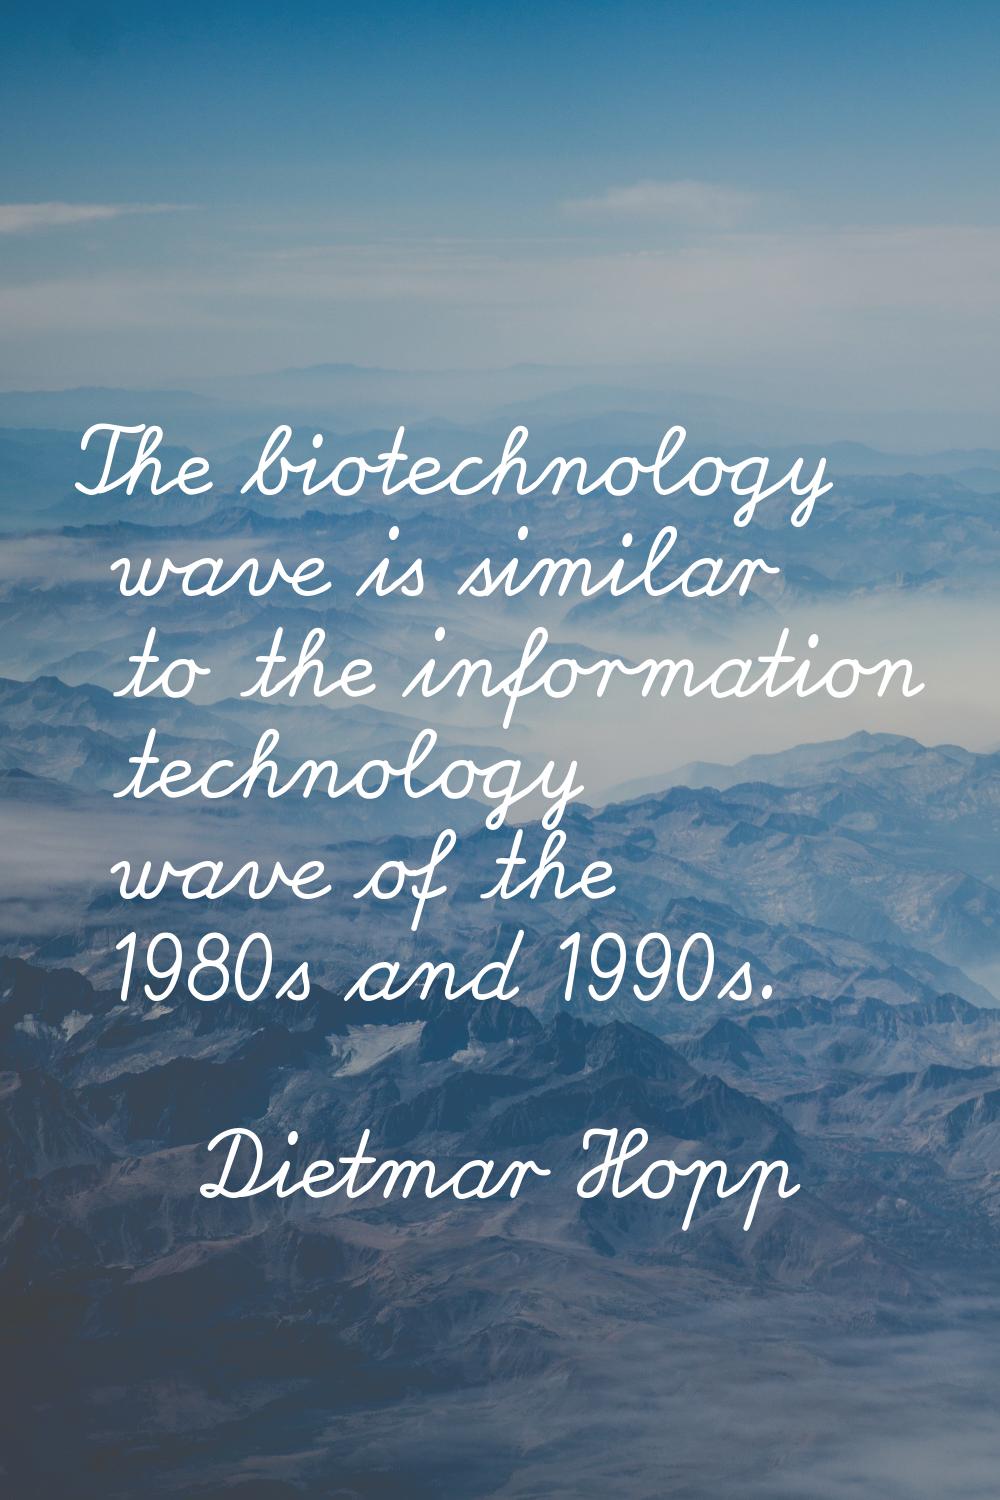 The biotechnology wave is similar to the information technology wave of the 1980s and 1990s.